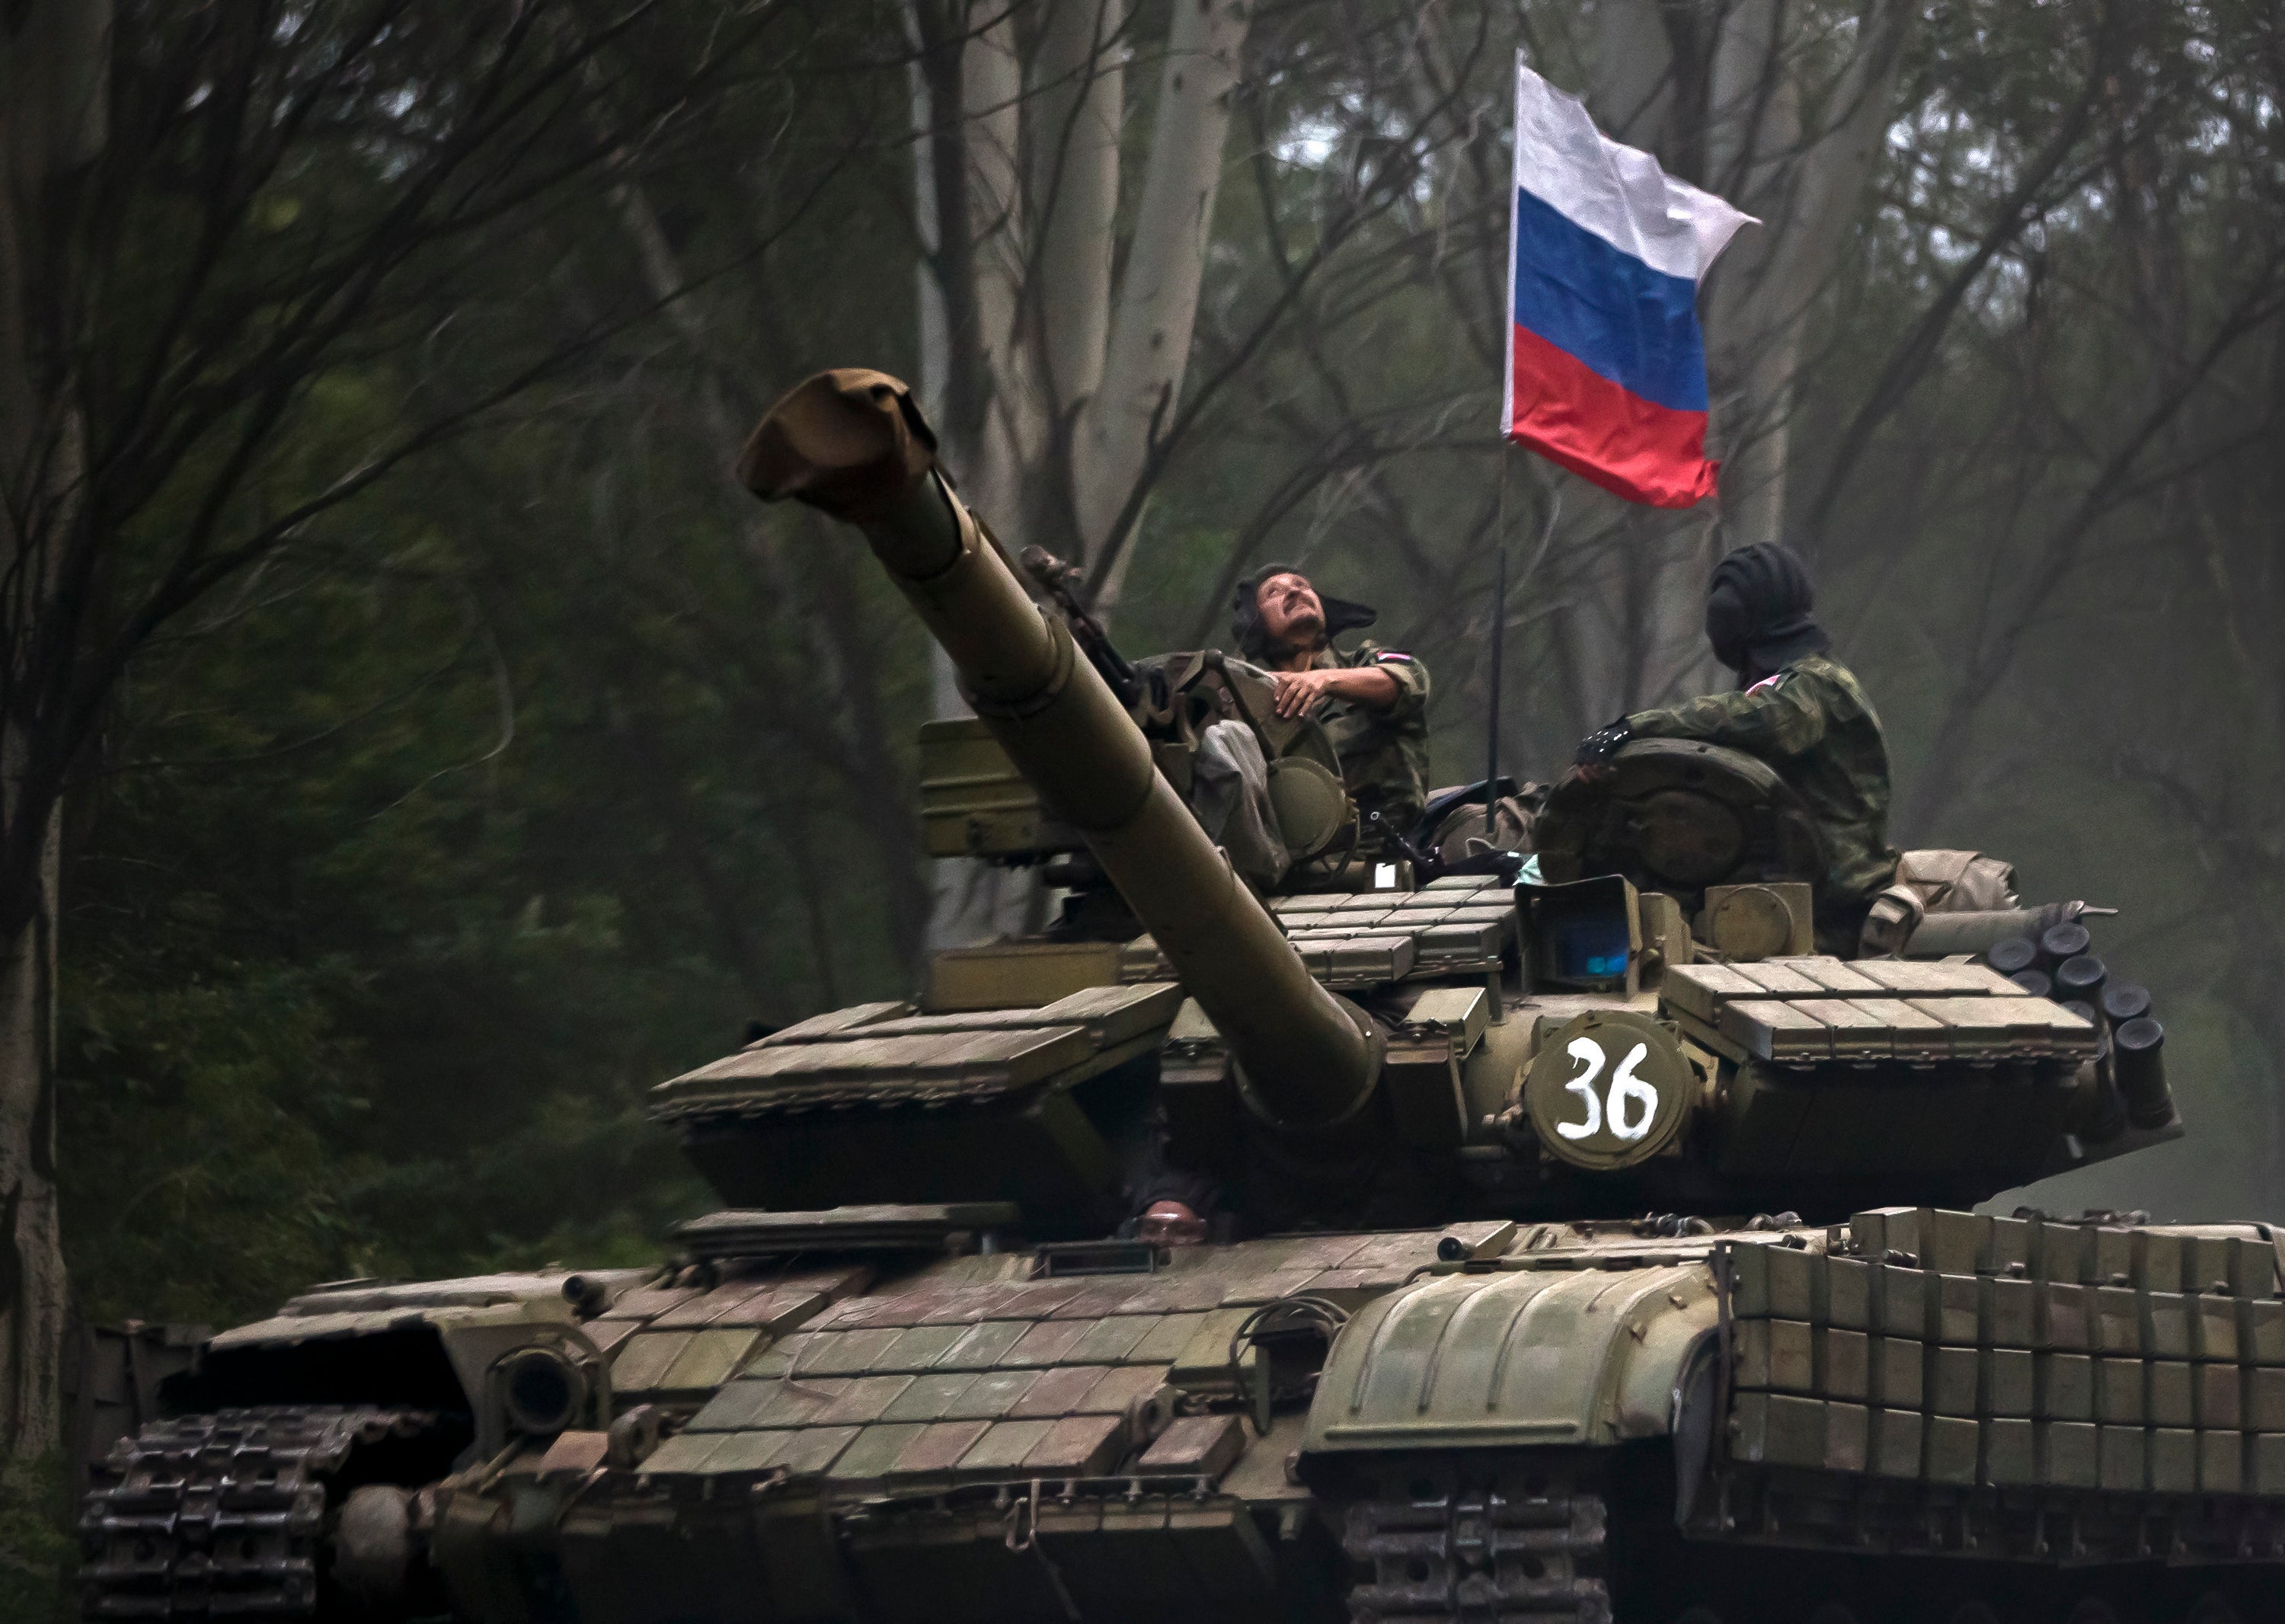 A pro-Russian rebel looks up while riding on a tank flying Russia’s flag (Vadim Ghirda/AP)